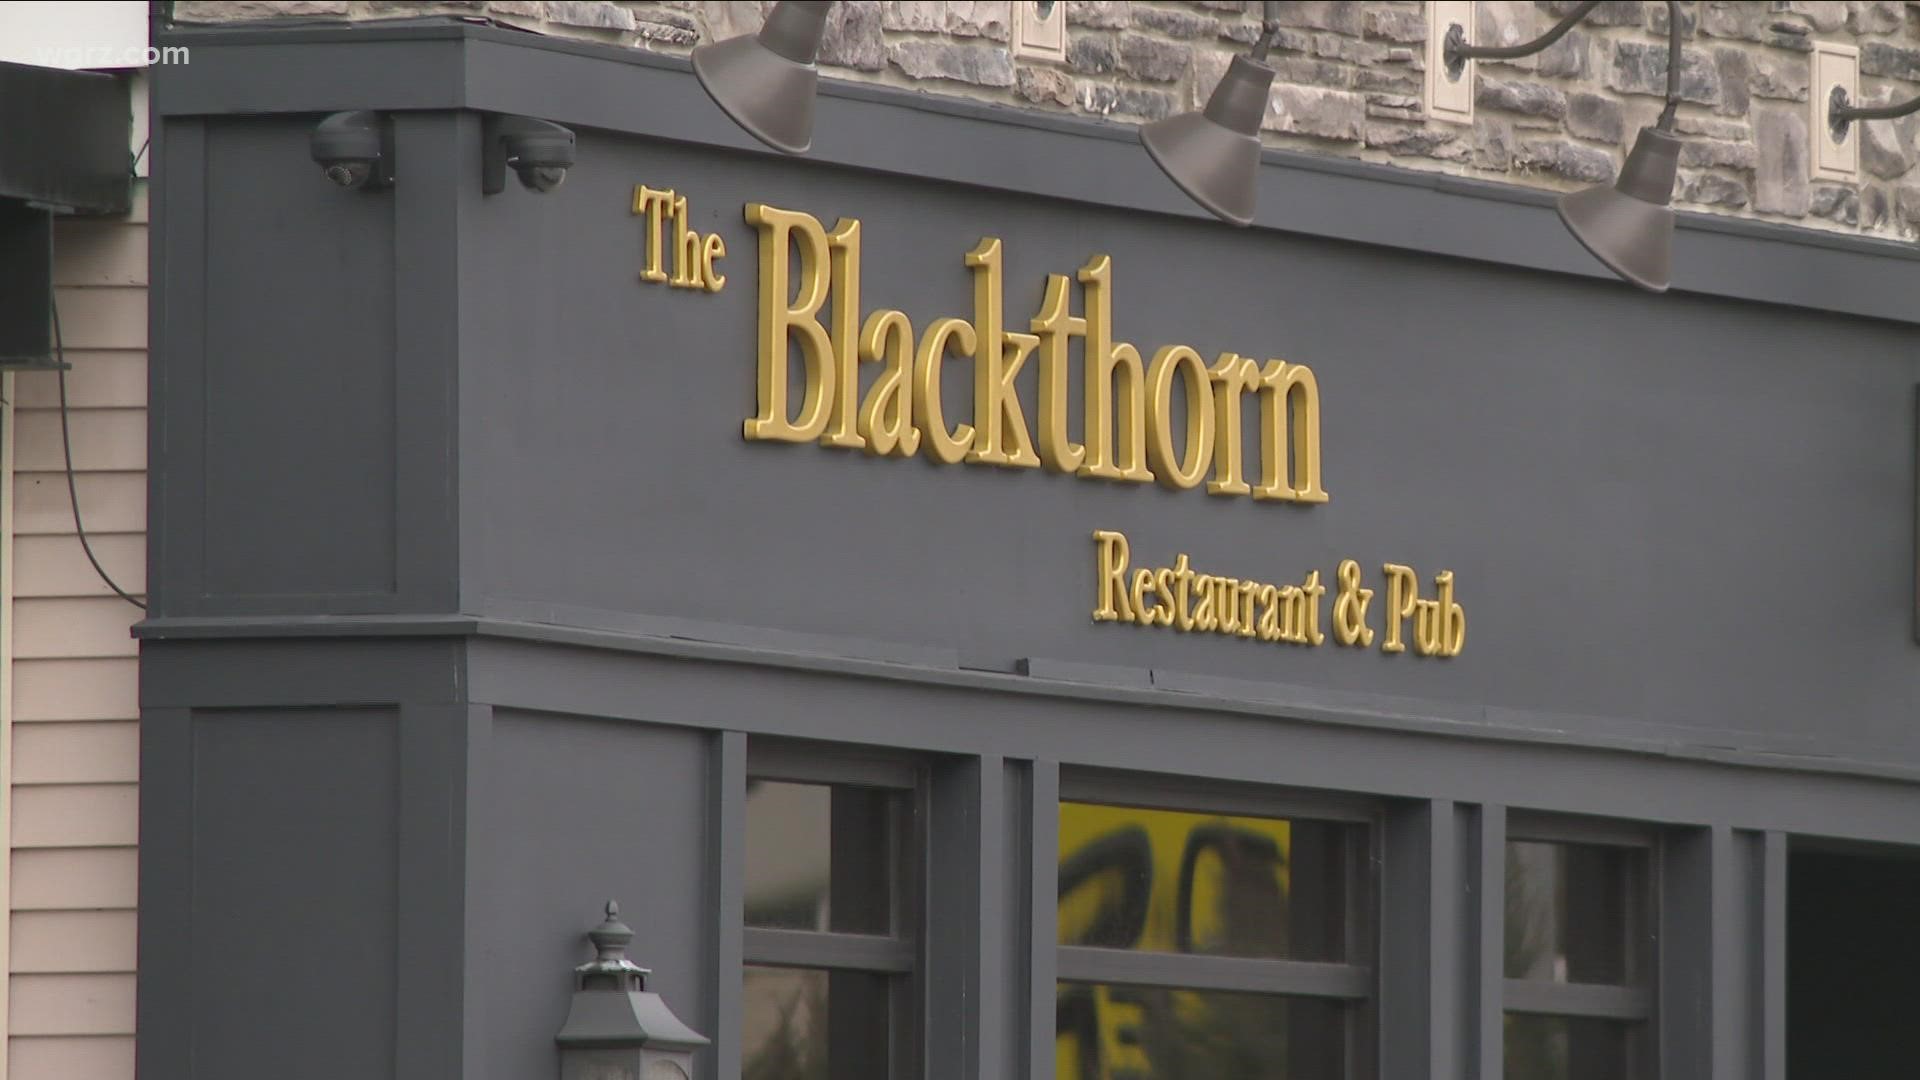 A Buffalo fire fighter is at ECMC in critical condition following an incident at Blackthorn Restaurant and Pub.